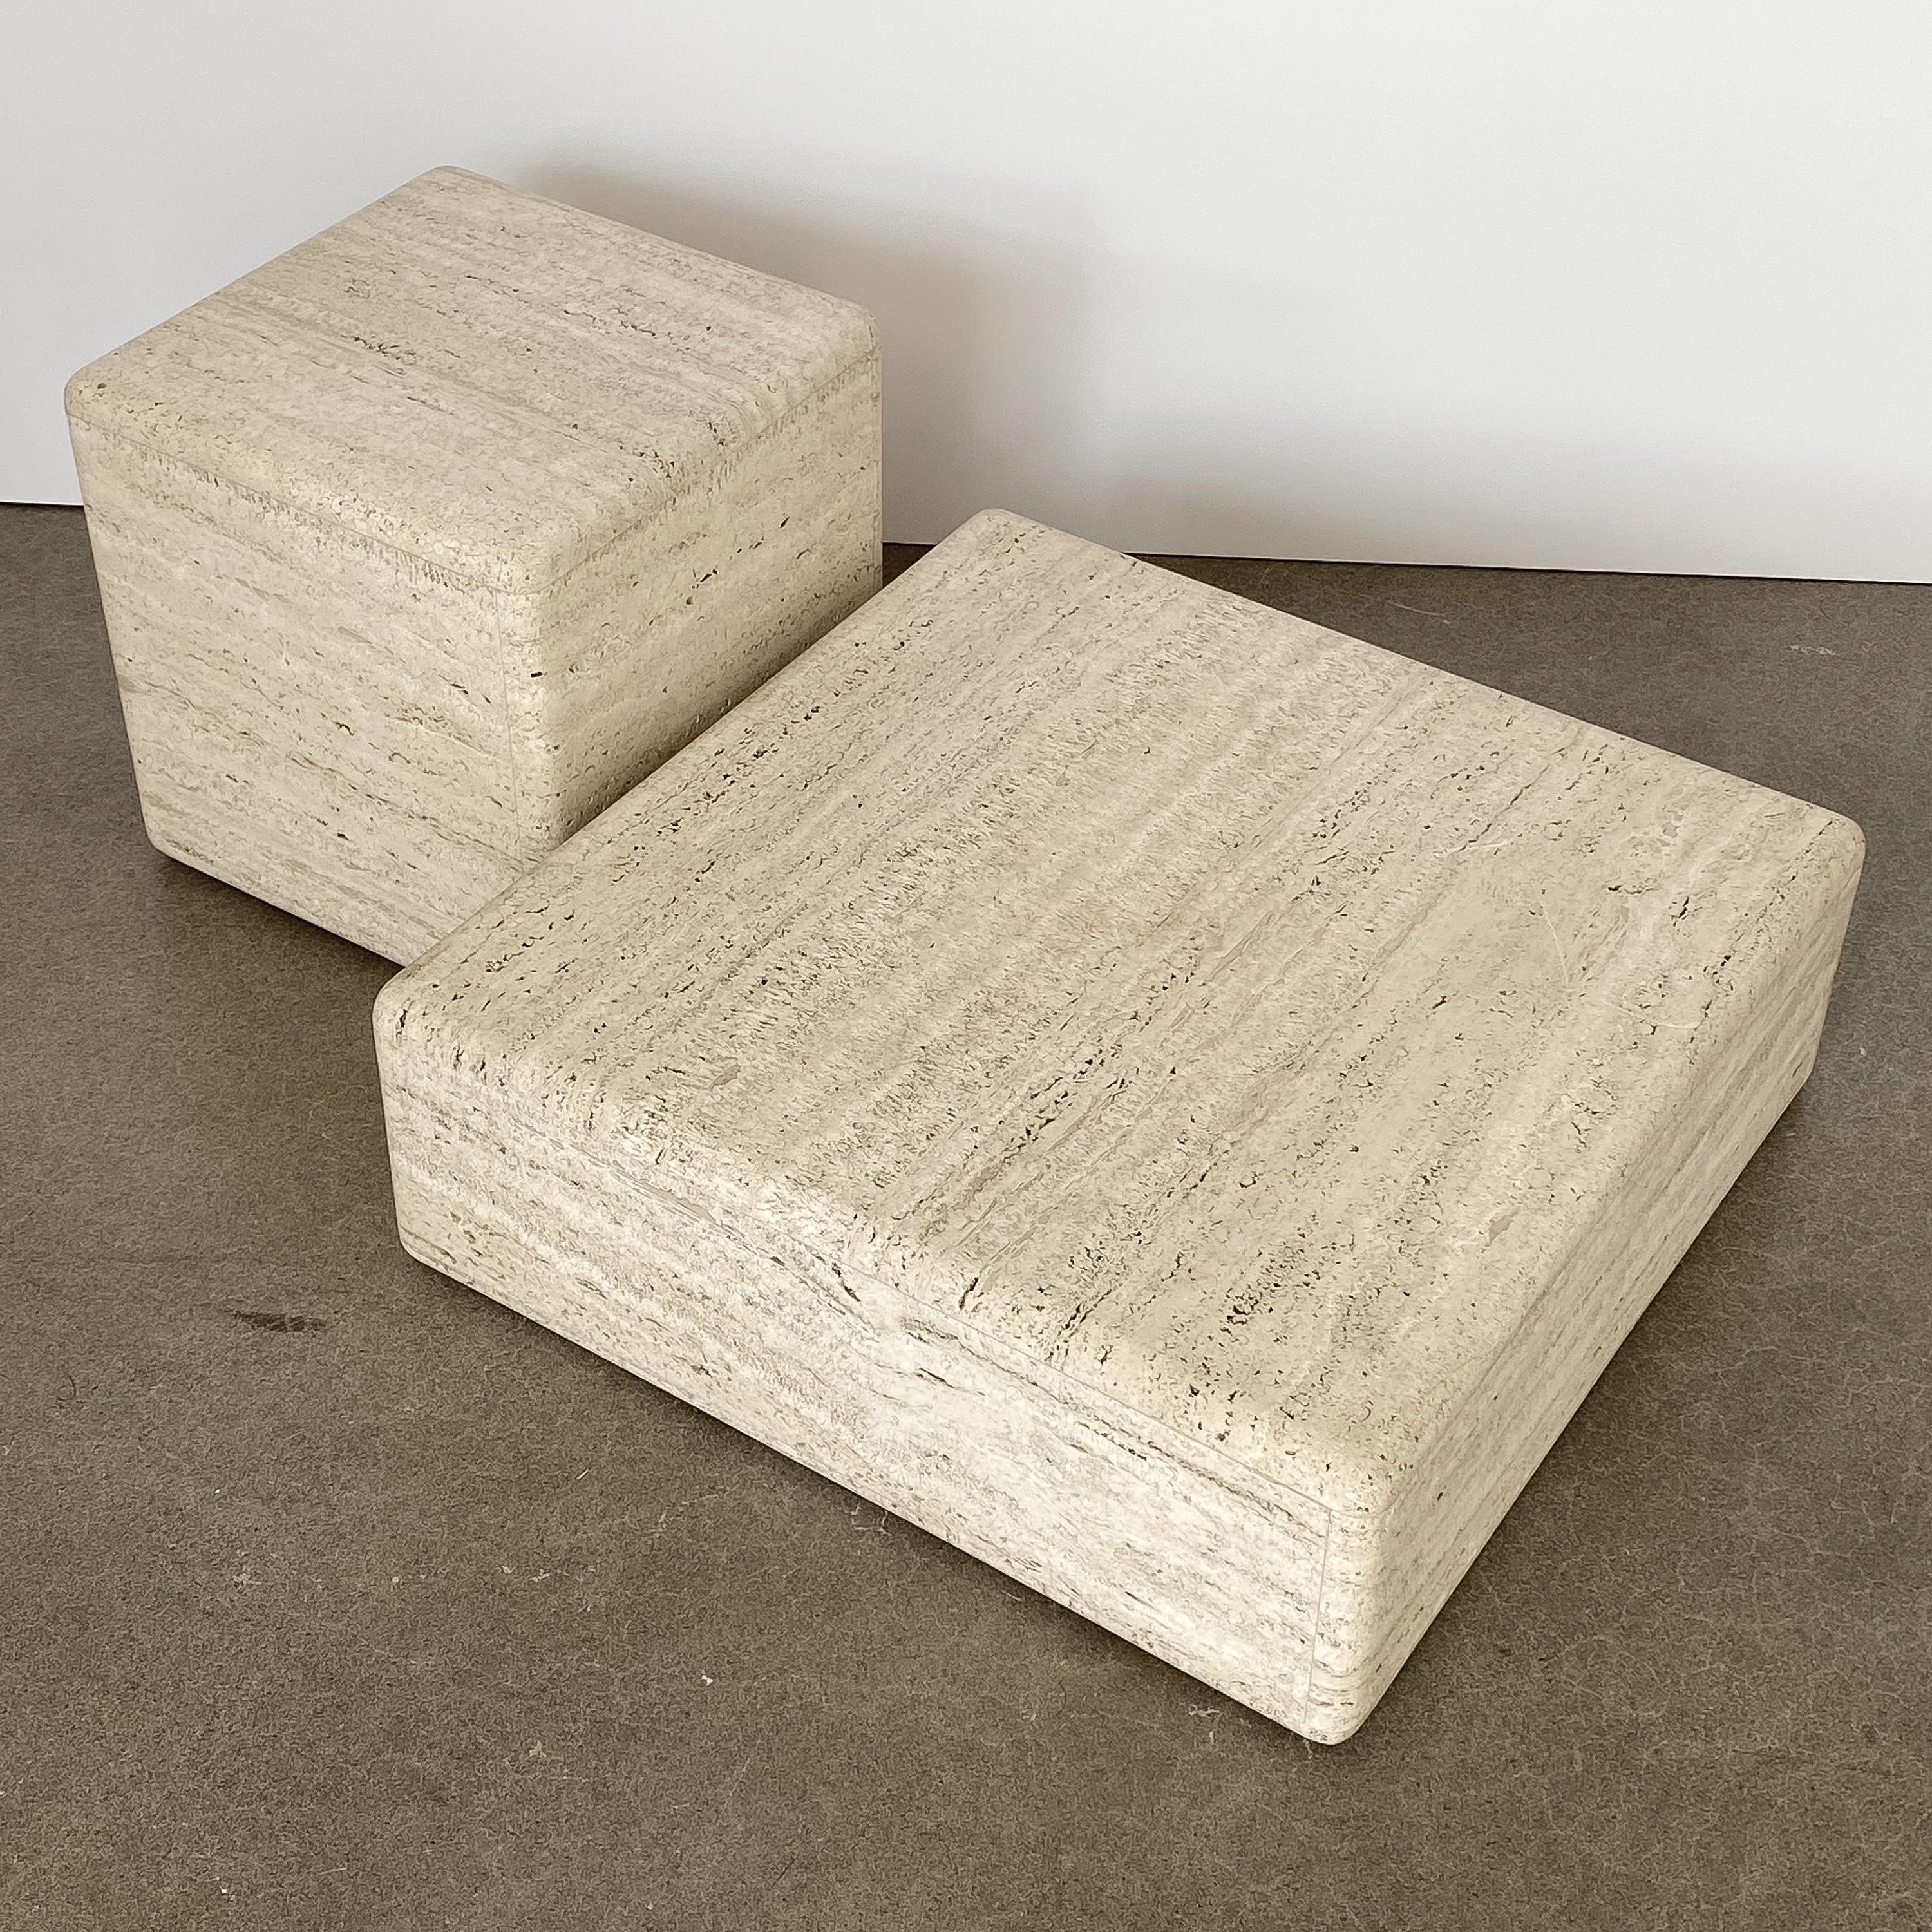 Two-piece Italian travertine sculptural coffee table, circa 1960s. A travertine cube and low square slab can be configured together to be used as a tiered coffee table, end table or art display pedestal. Modern Minimalist design. Each piece is